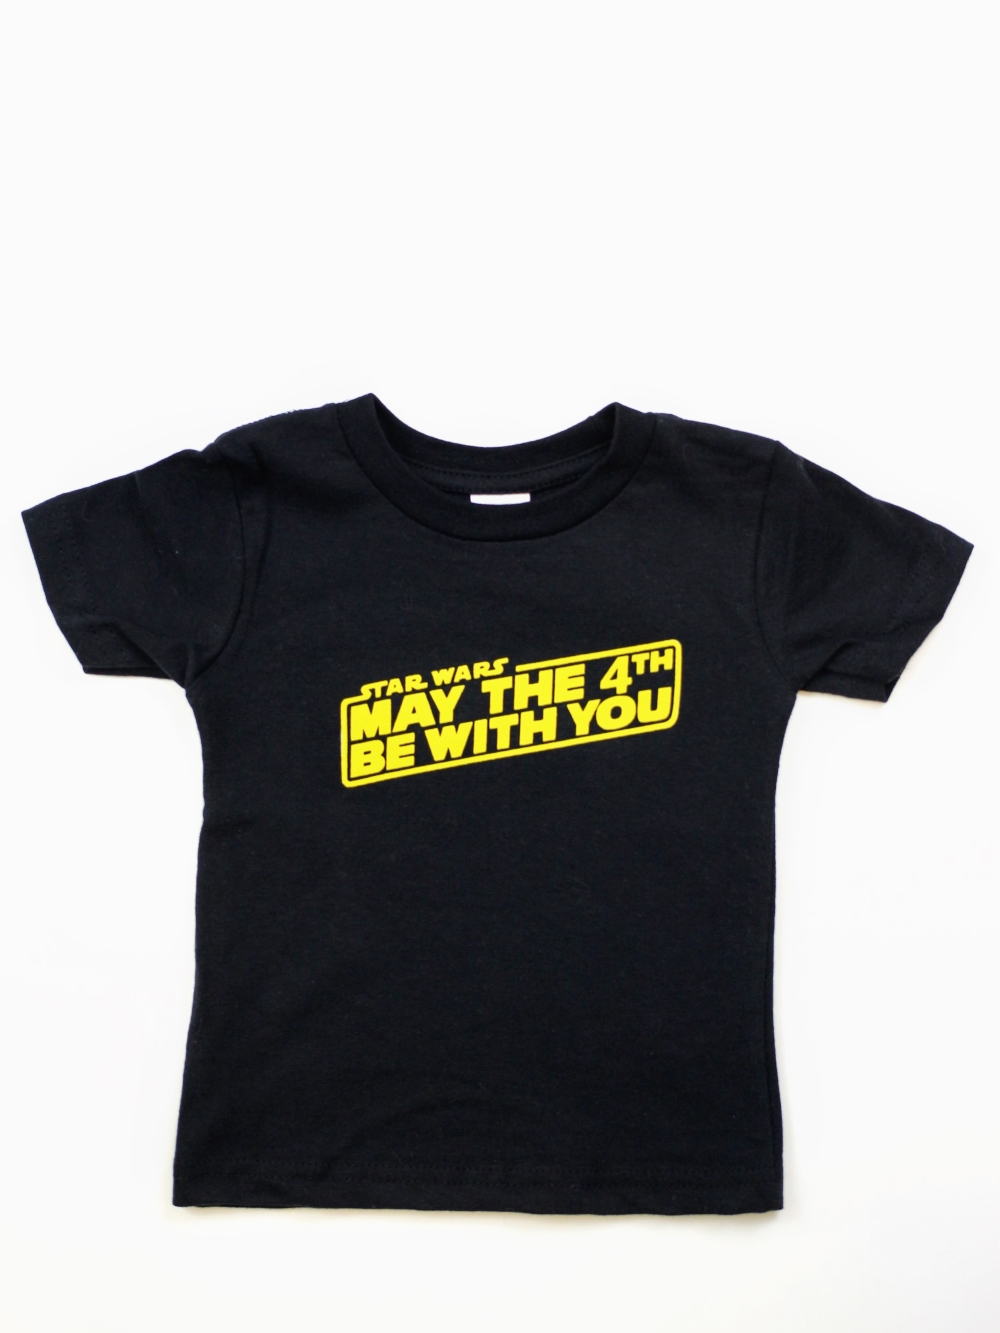 Get ready to celebrate Star Wars day with this DIY May The 4th Be With You t-shirt. Make your own t-shirt for under $5. Click through to see the steps so you can make one too!